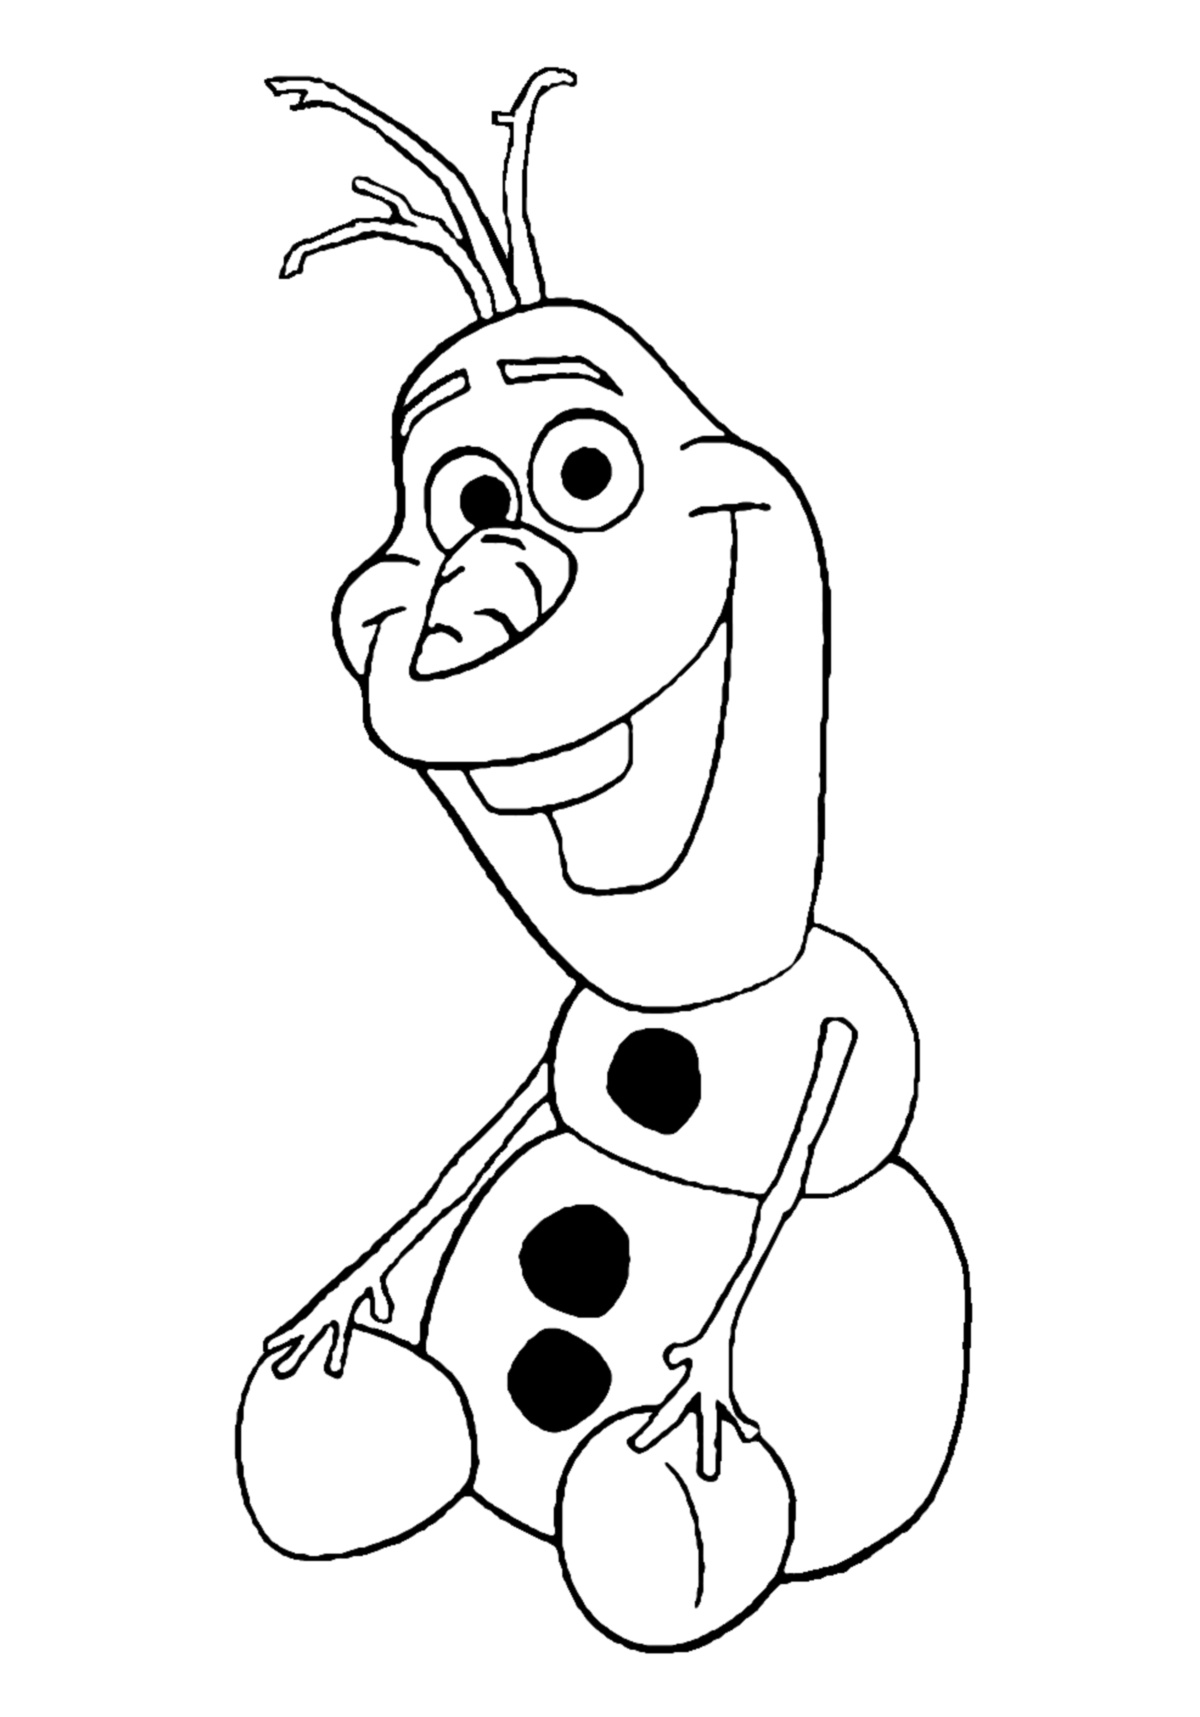 clip art you can color - photo #38